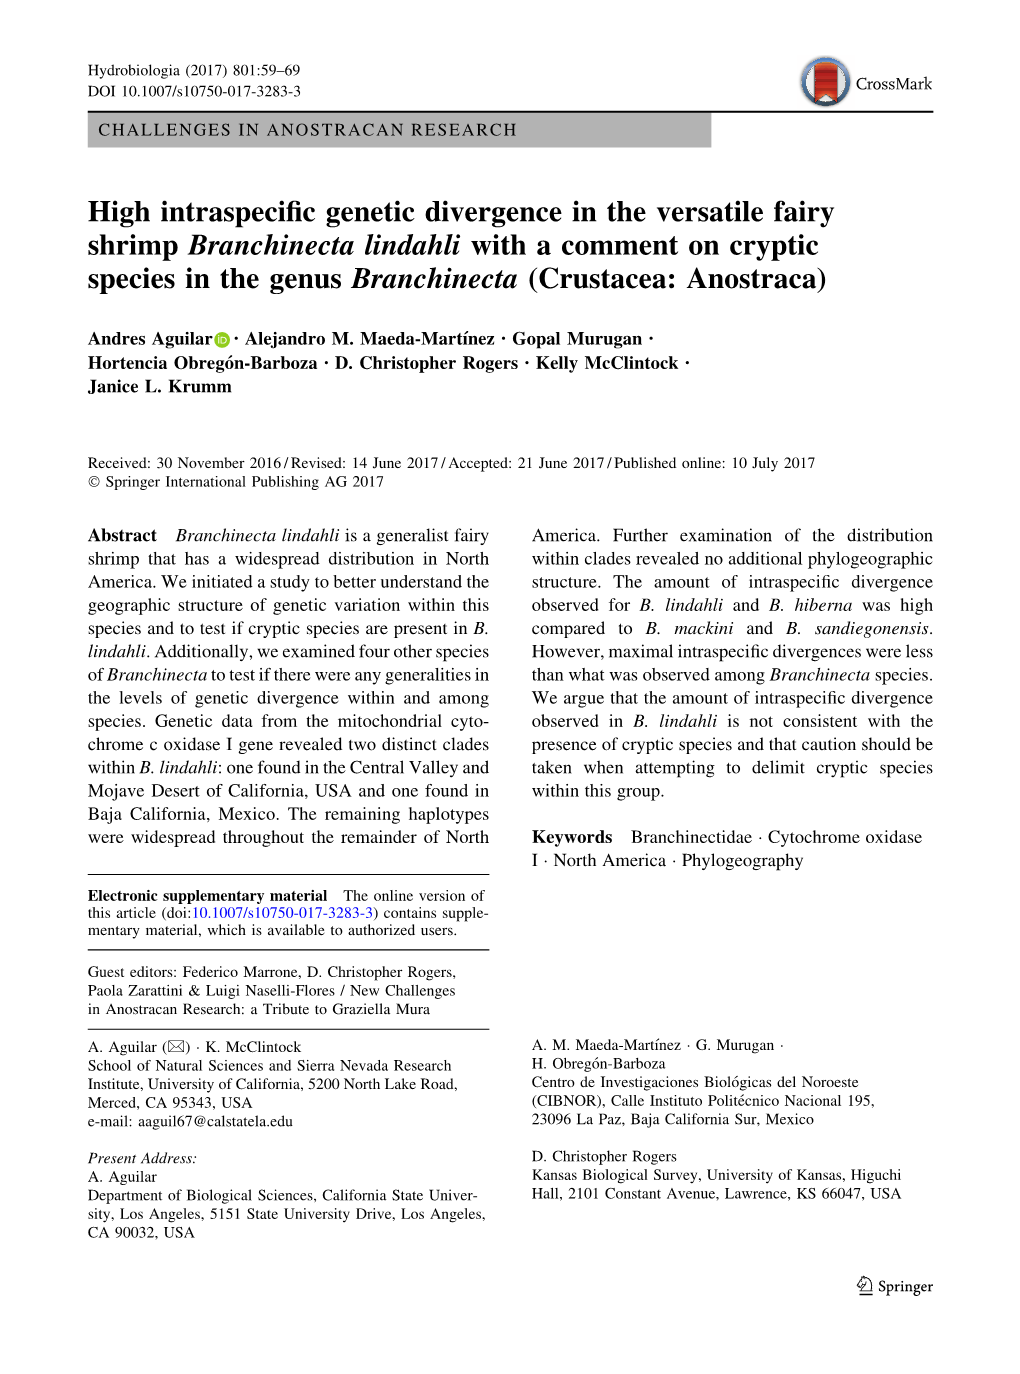 High Intraspecific Genetic Divergence in the Versatile Fairy Shrimp